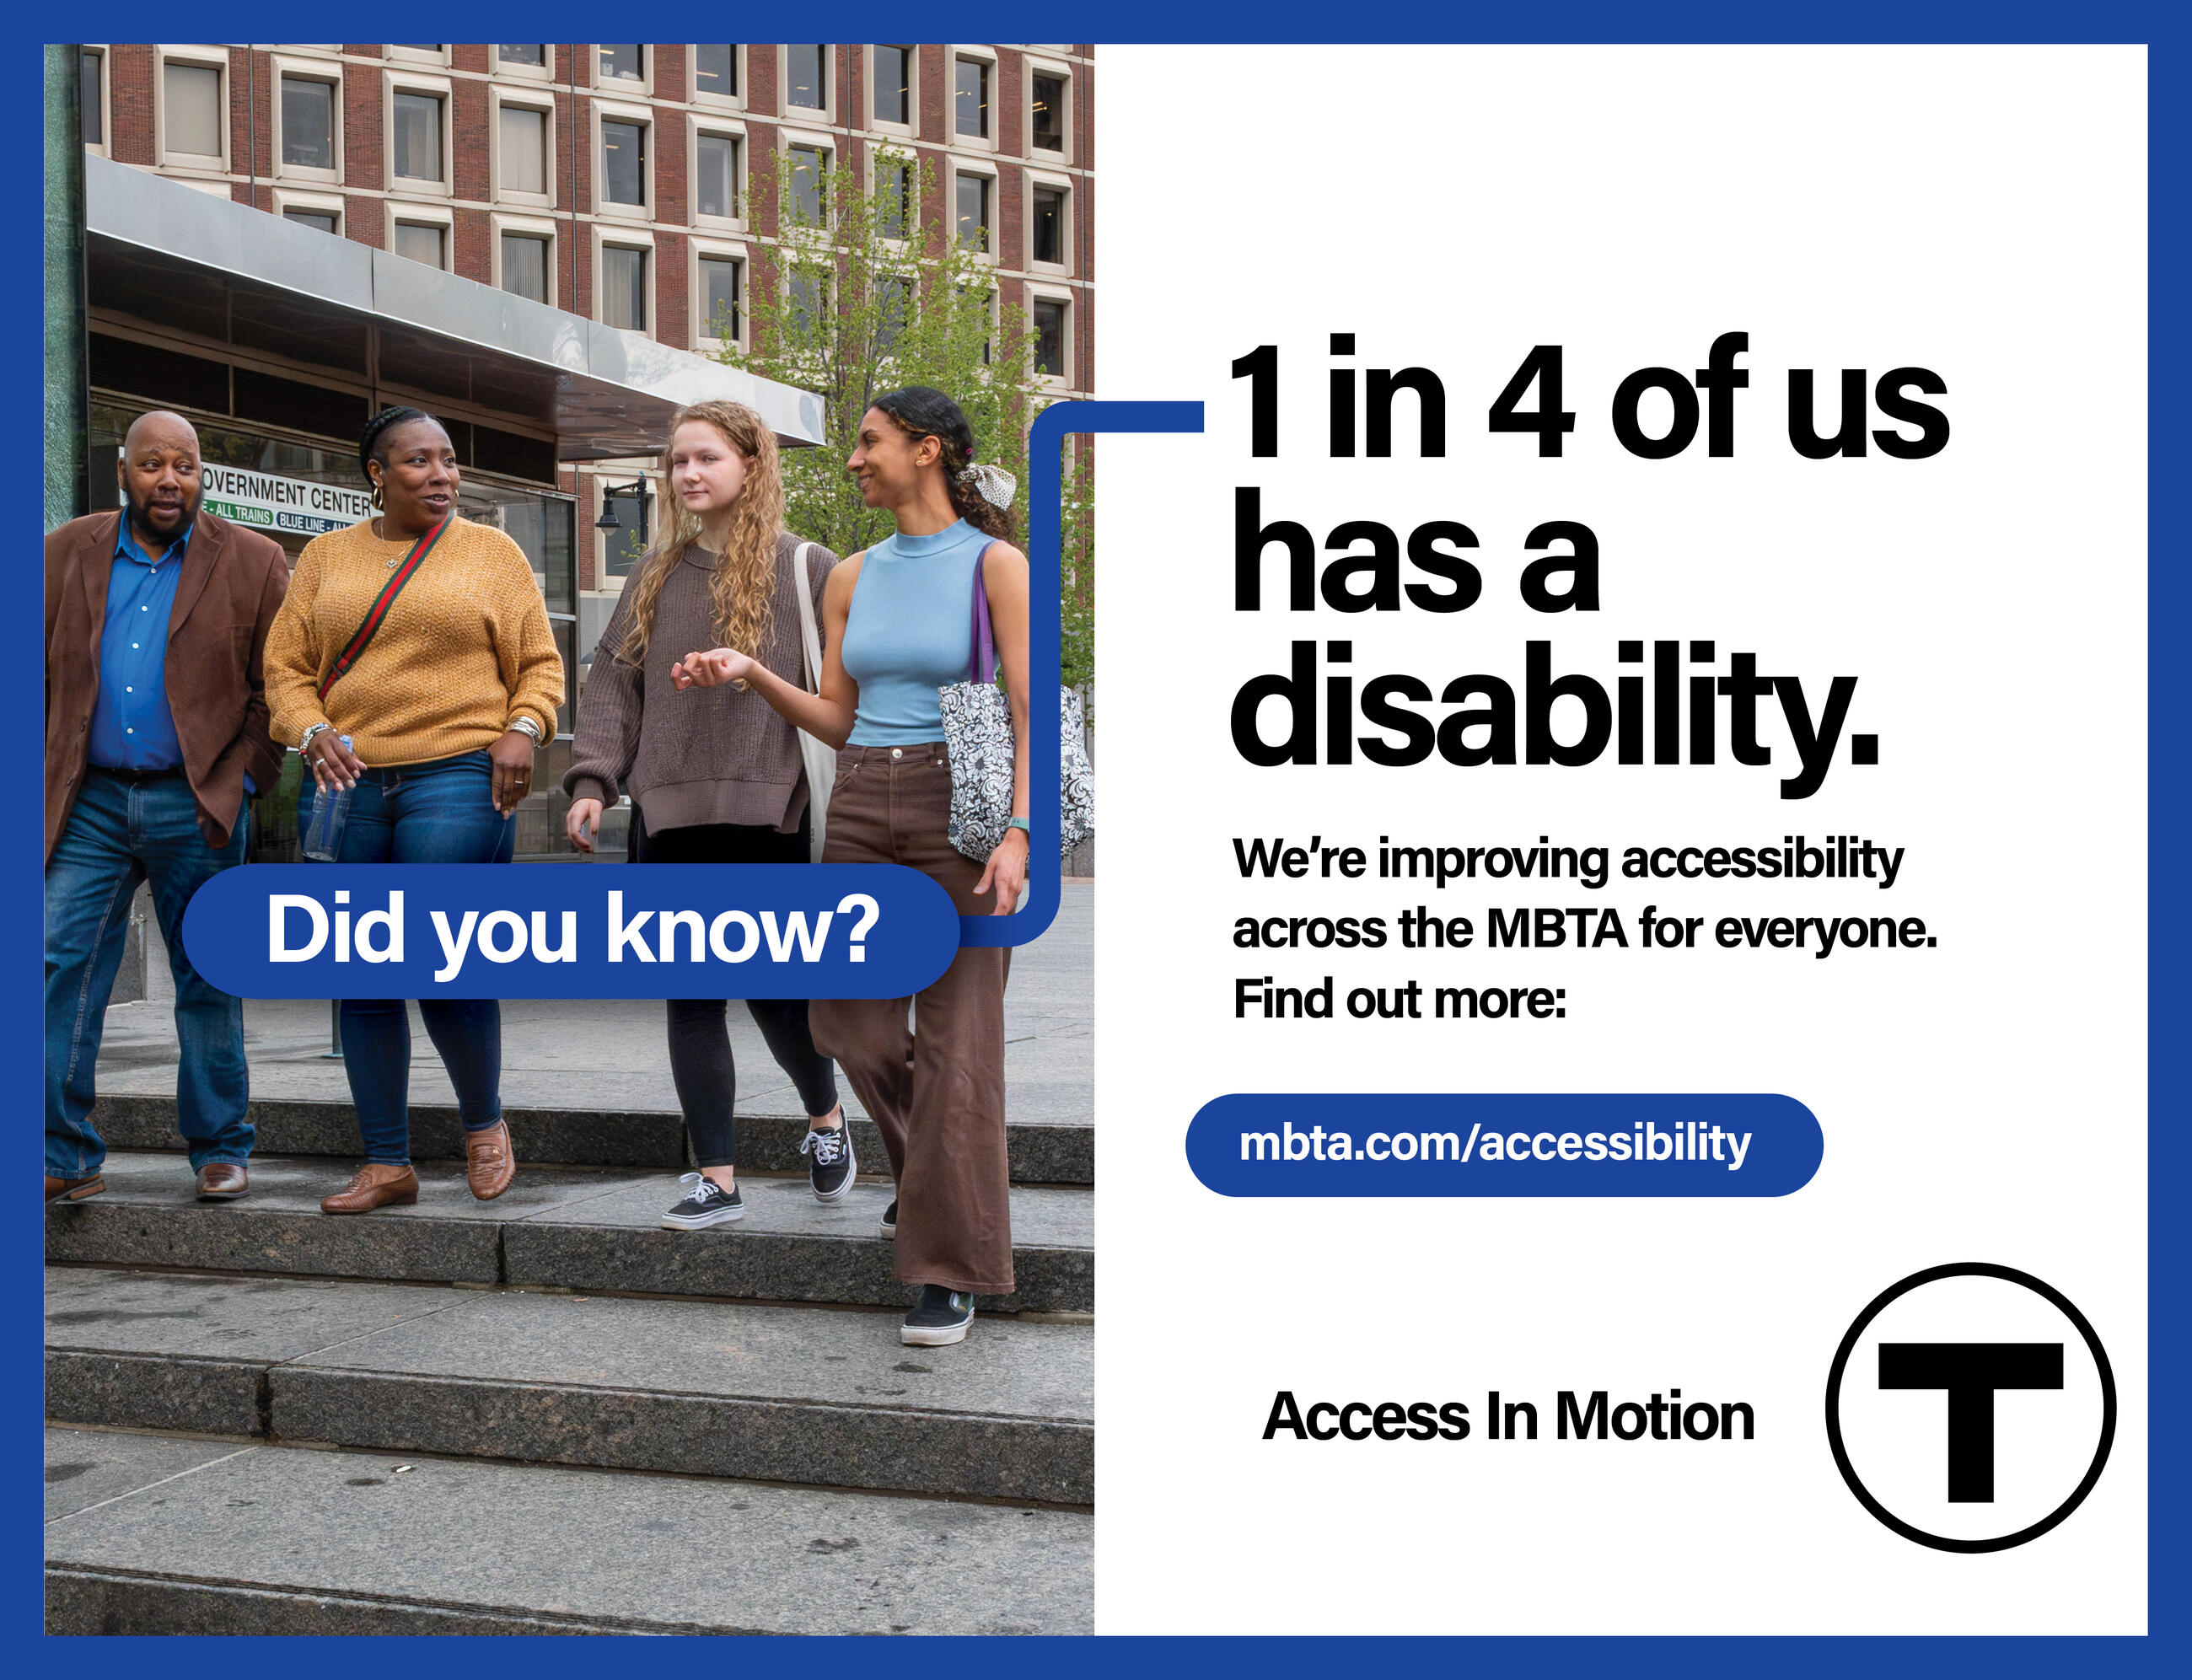 Four people descend a staircase outside the Government Center T station: a bald African American man; an African American woman holding a water bottle; a white woman with curly blonde hair, and a young Latina woman. The words “Did you know?” appear in a blue bubble in the foreground. Text reads: “1 in 4 of us has a disability.” Smaller text reads: “We’re improving accessibility across the MBTA for everyone. Find out more: mbta.com/accessibility” followed by the “Access In Motion” tagline and the T logo.